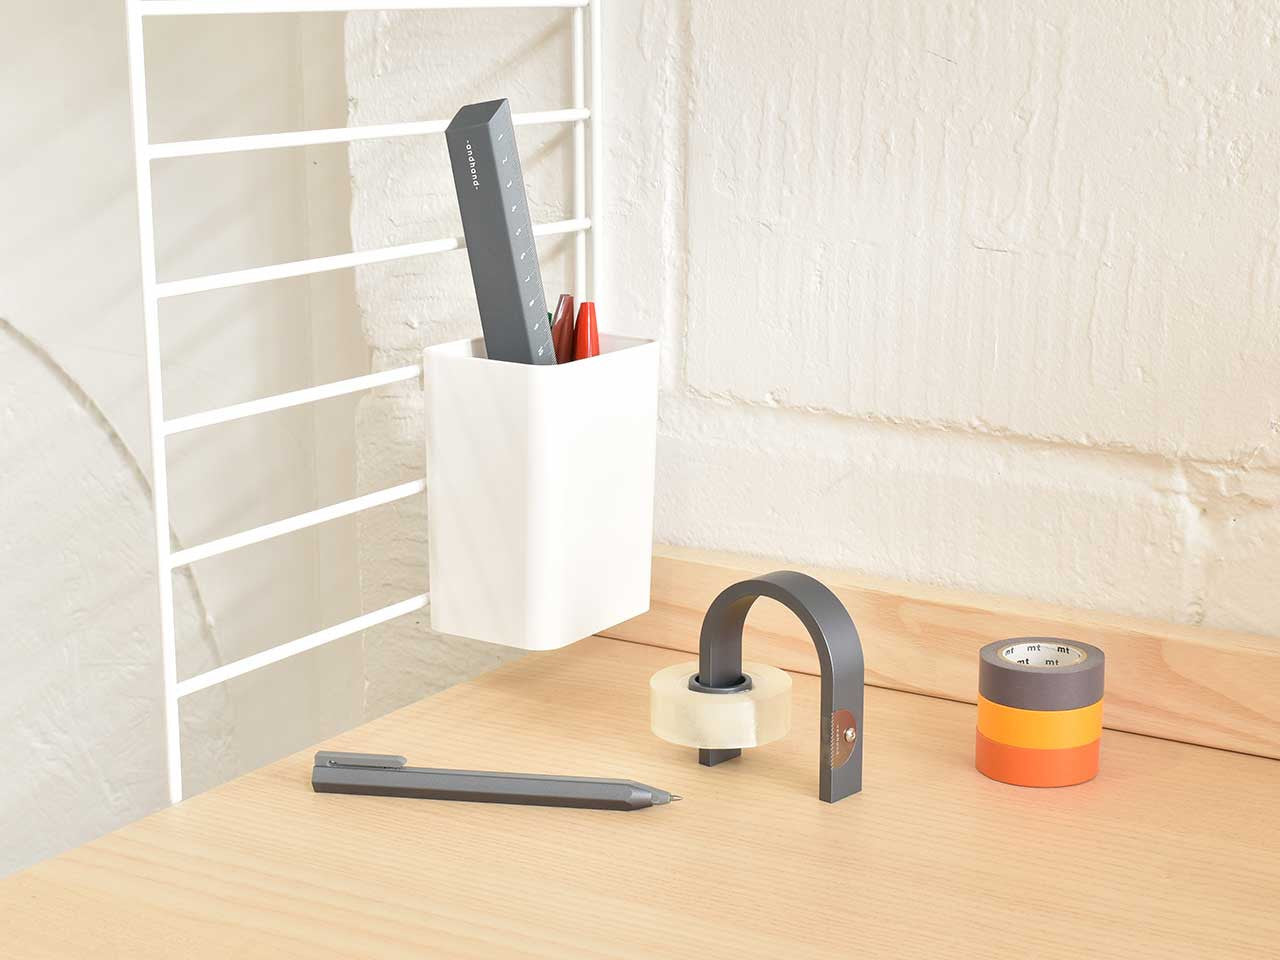 Hoop tape dispenser by Andhand. Minimal and durable tape dispenser in slate grey finish. Tape with dispenser.